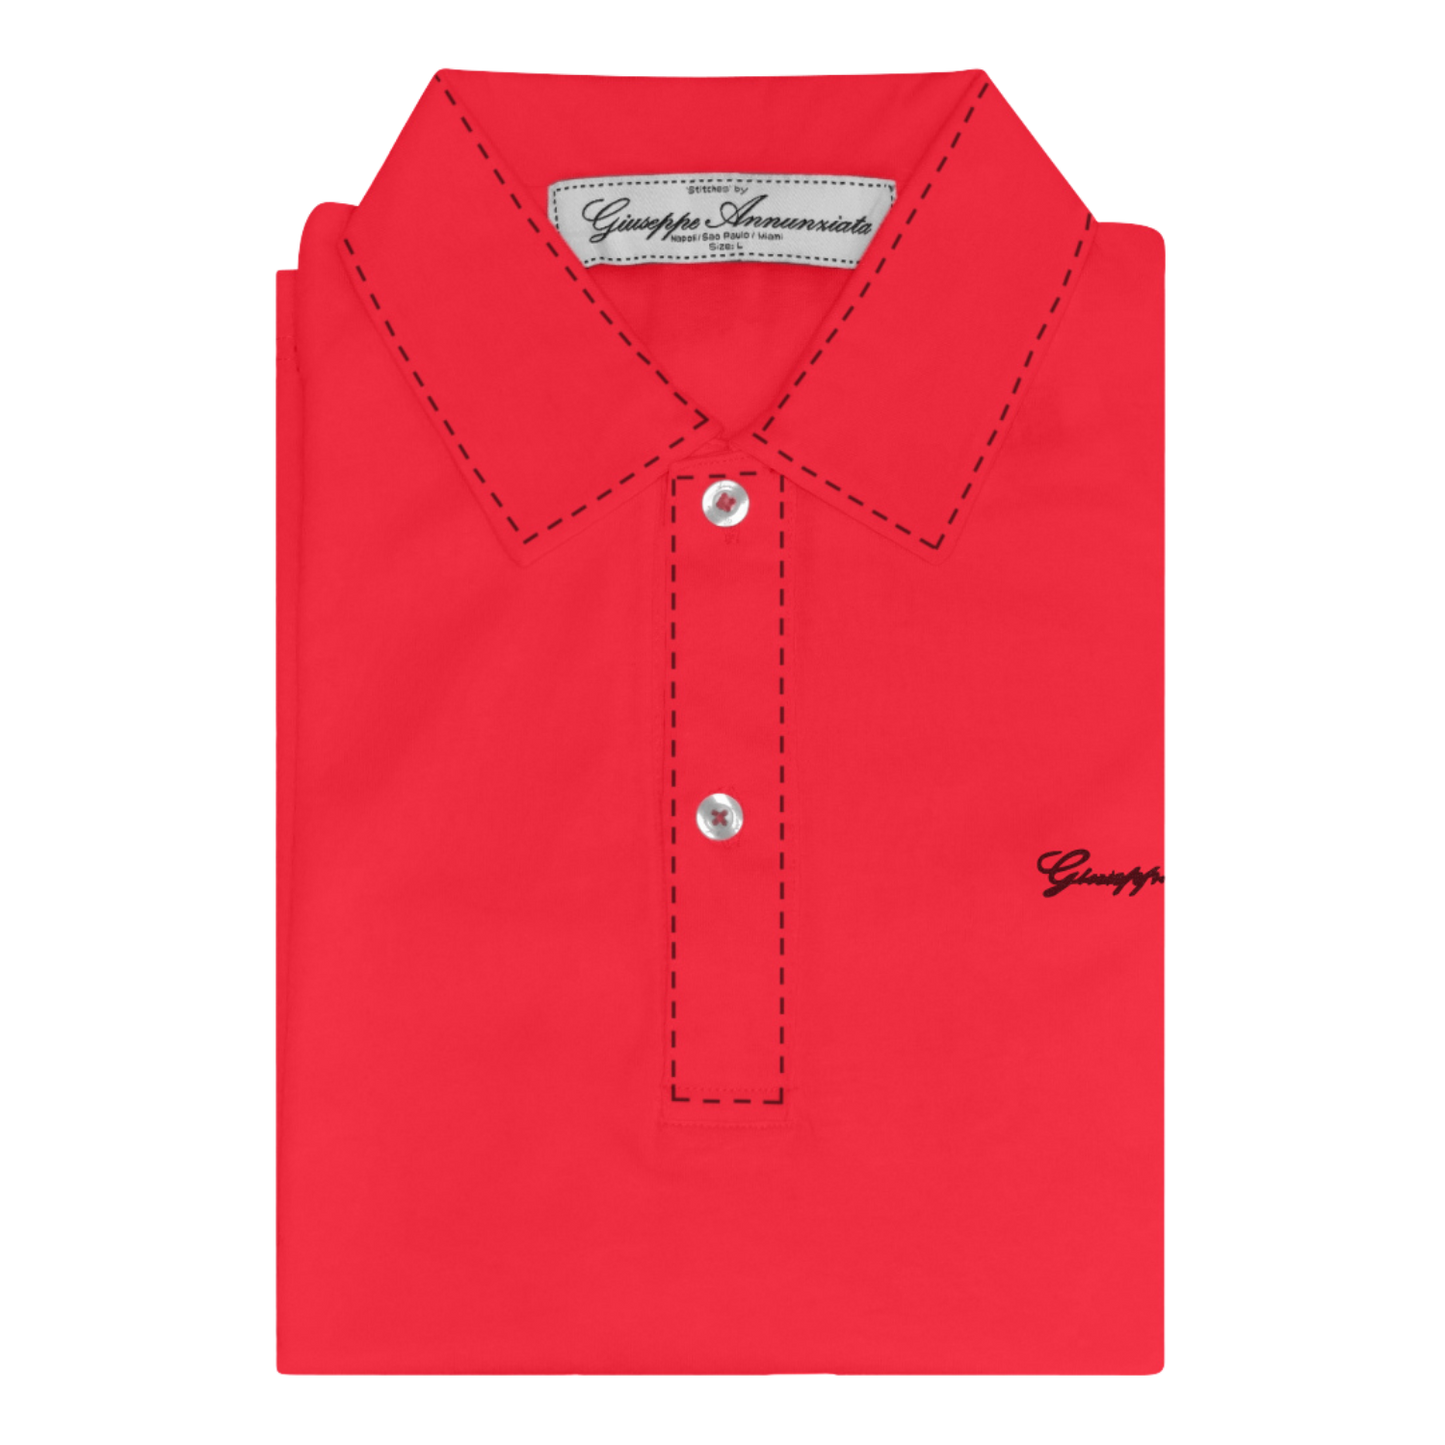 Stitches Polo Red and Black